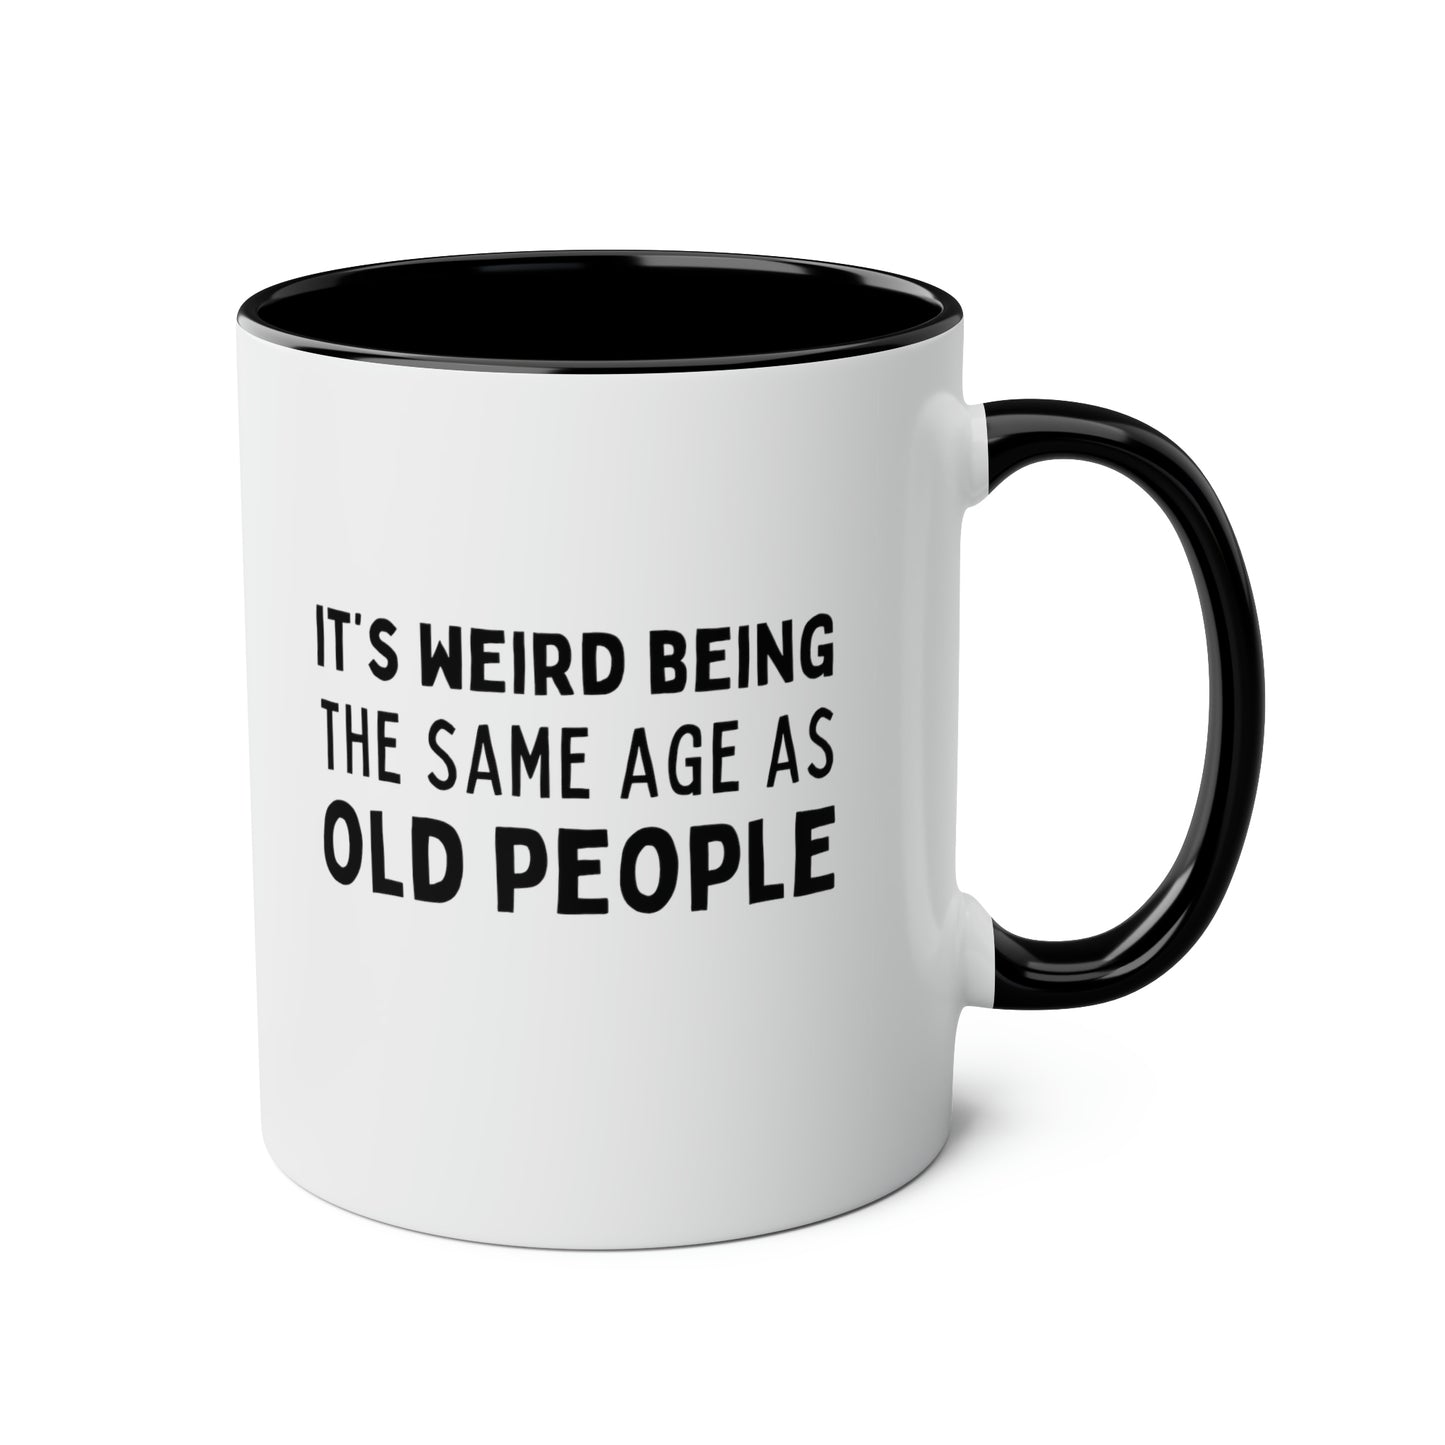 Its Weird Being The Same Age As Old People 11oz white with black accent funny large coffee mug gift dad  mom grandma grandpa mum birthday waveywares wavey wares wavywares wavy wares